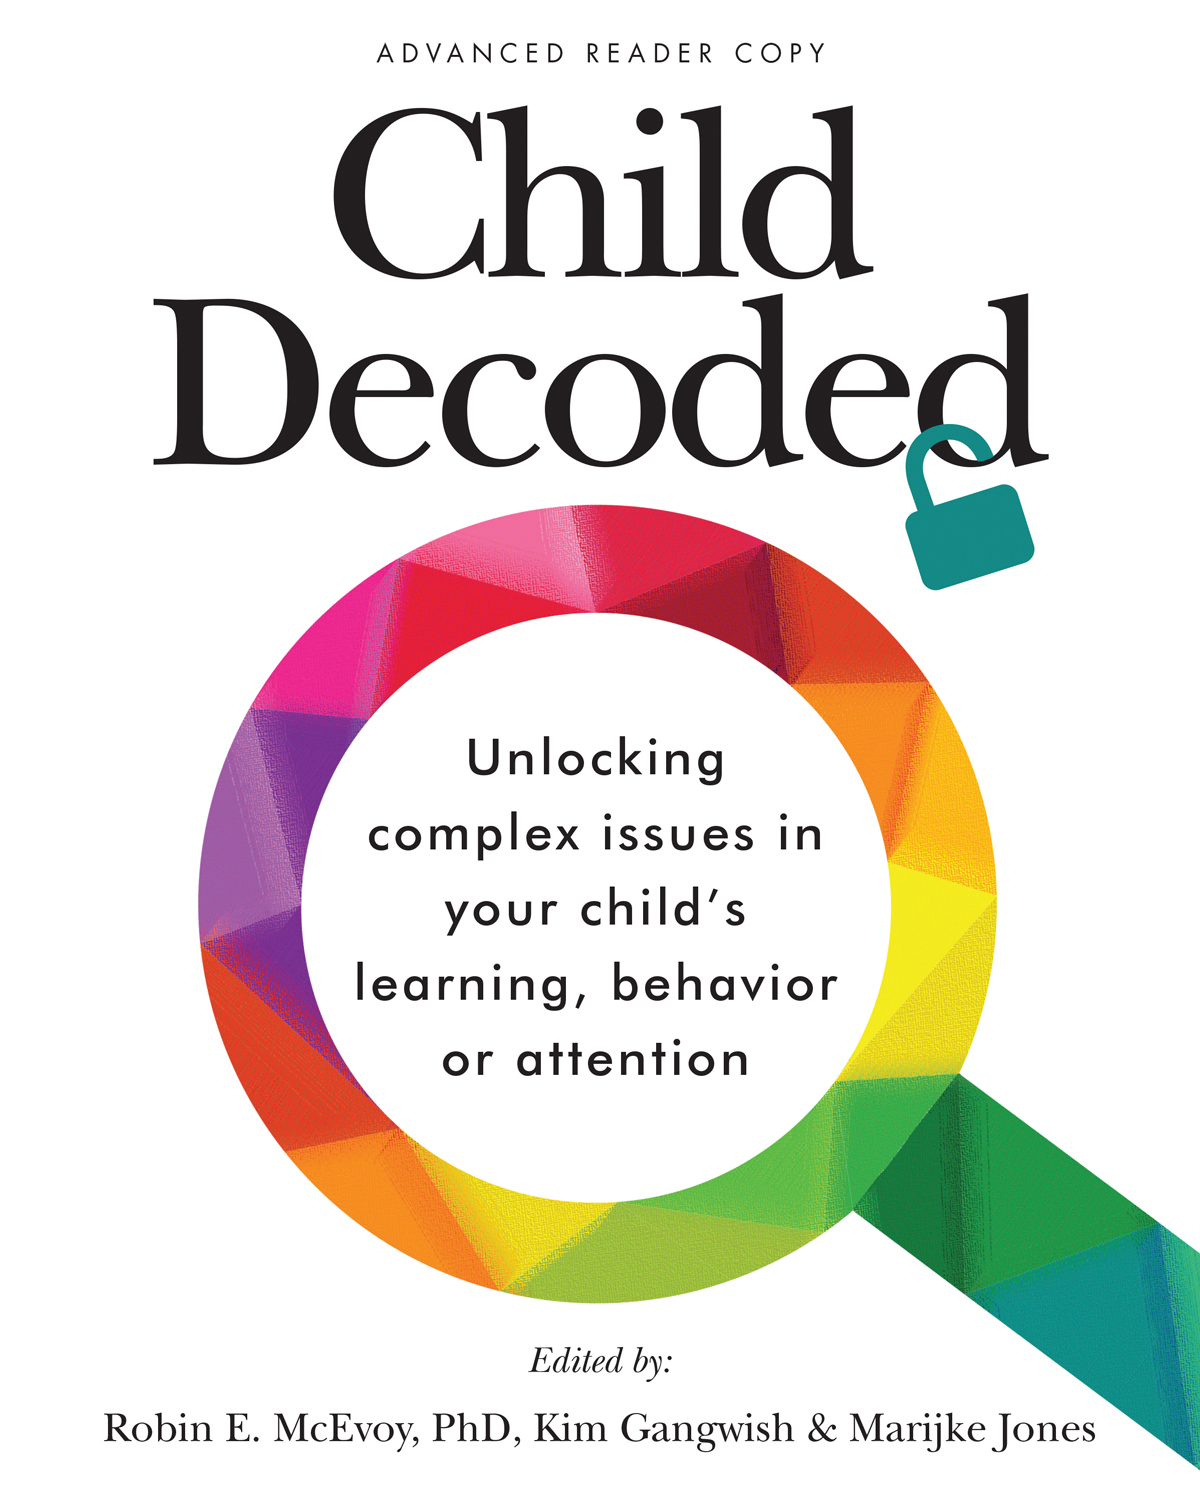 Child Decoded: Unlocking complex issues in your child's learning, behavior or attention